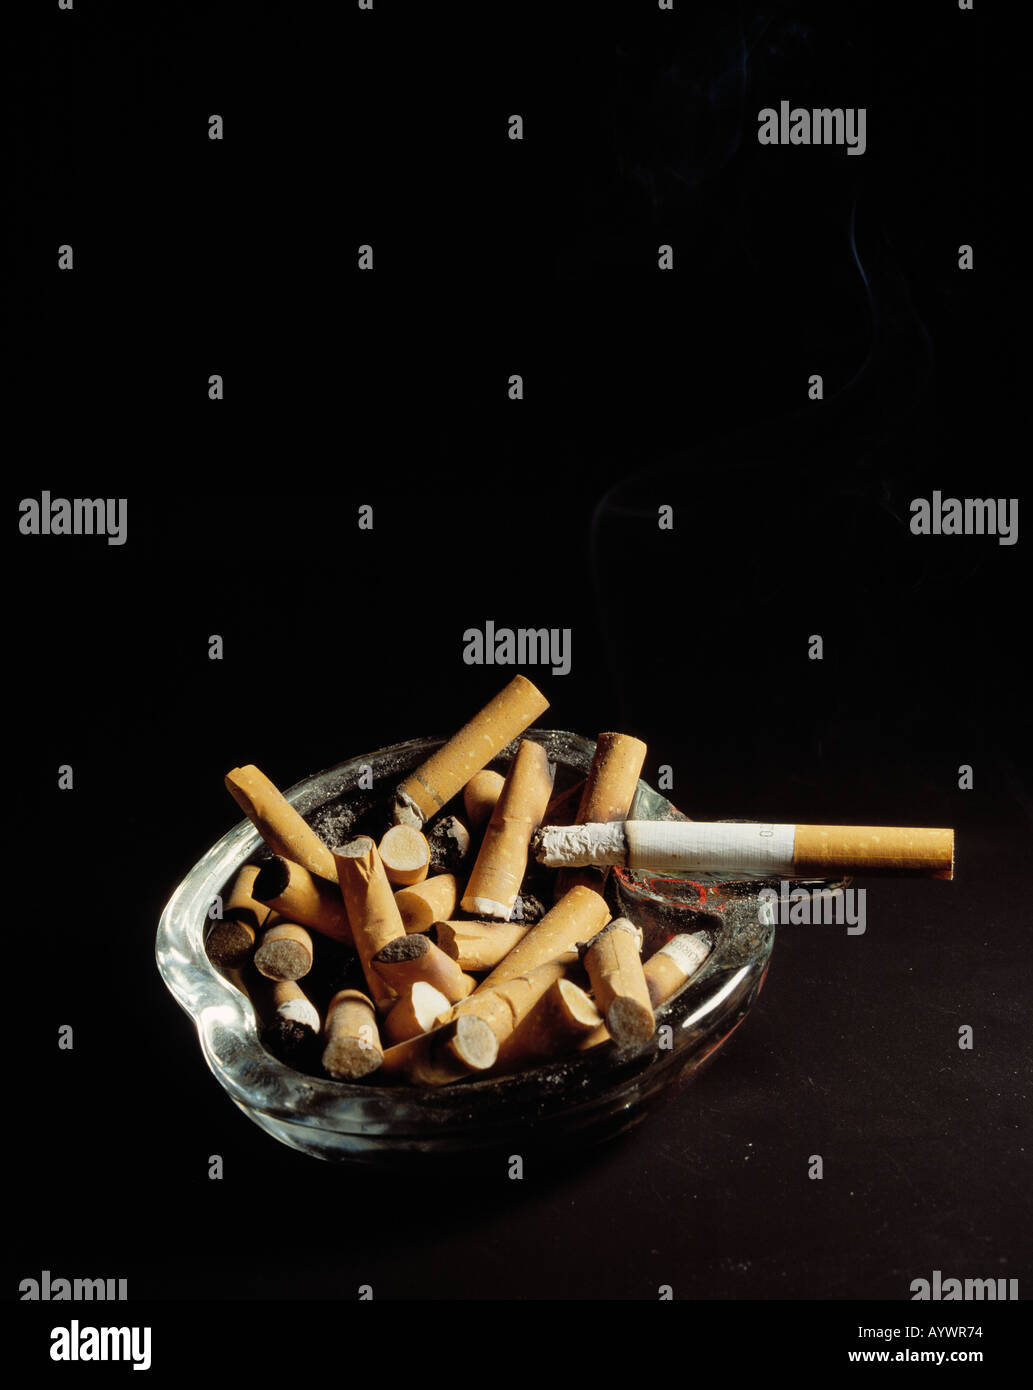 health, full ashtray, overcrowded, smoking cigarette on the ashtray, cigarette ends, butts, stubs, smoking Stock Photo